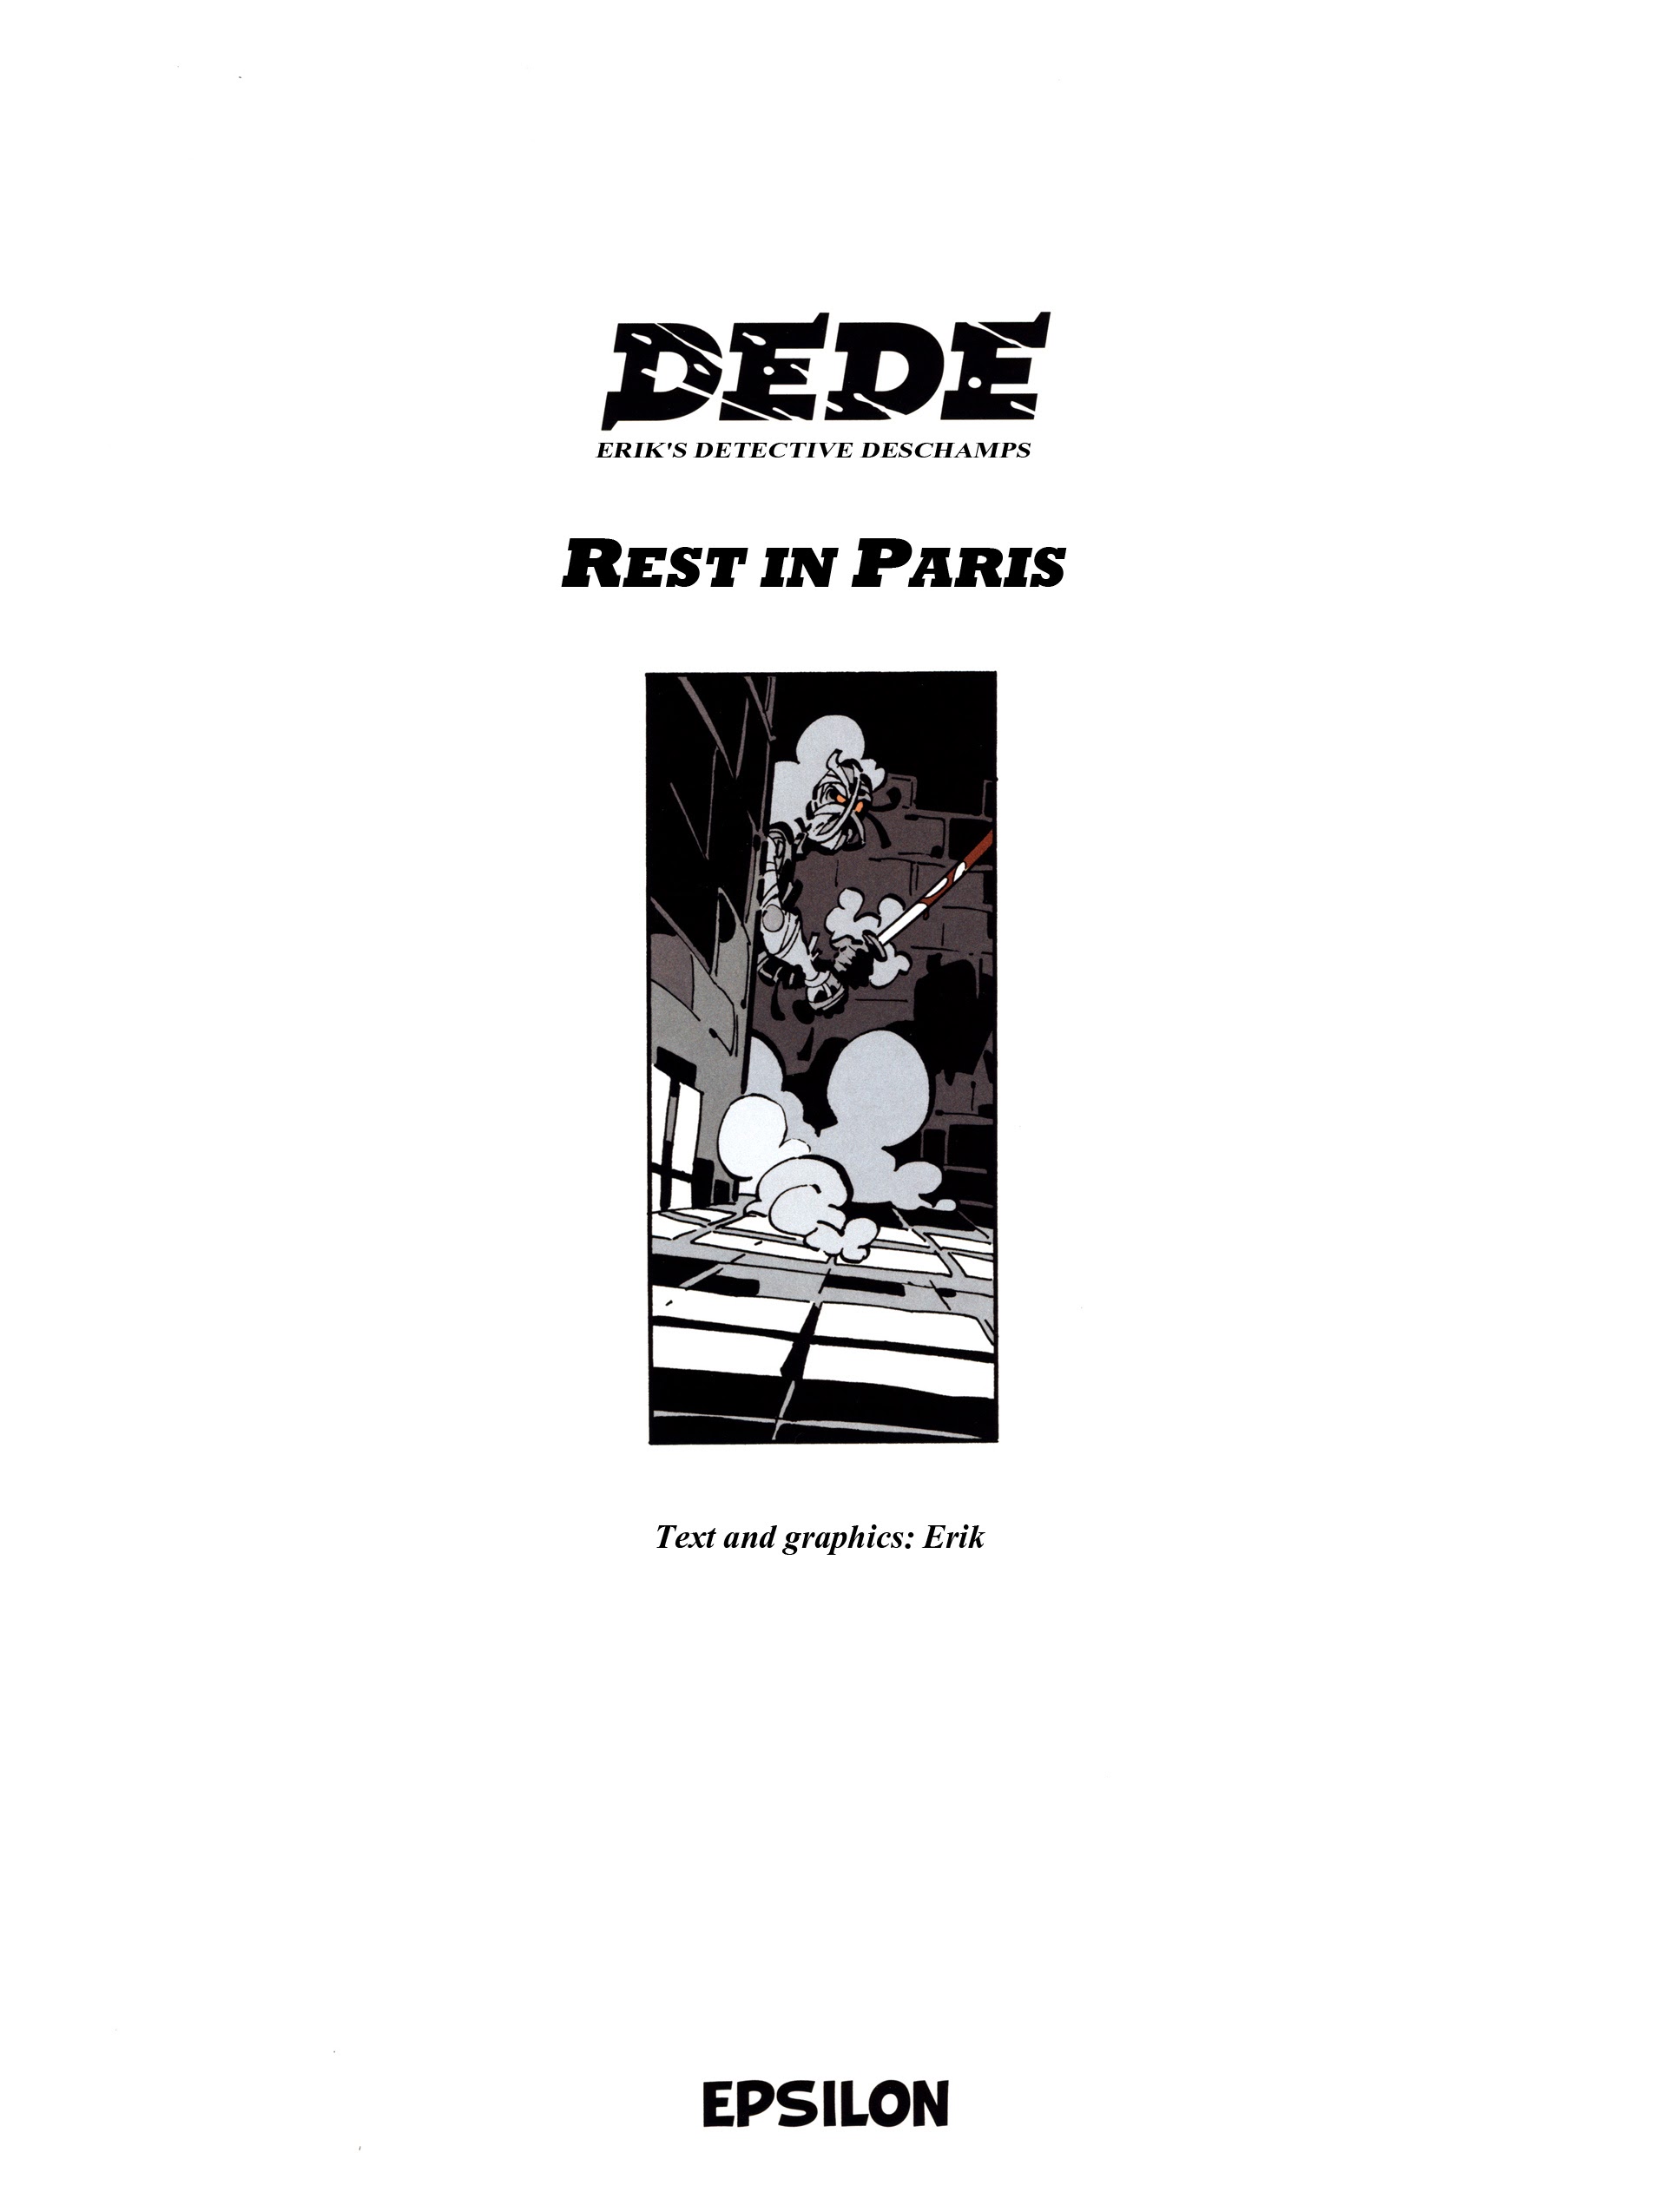 Read online Dede comic -  Issue #4 - 4